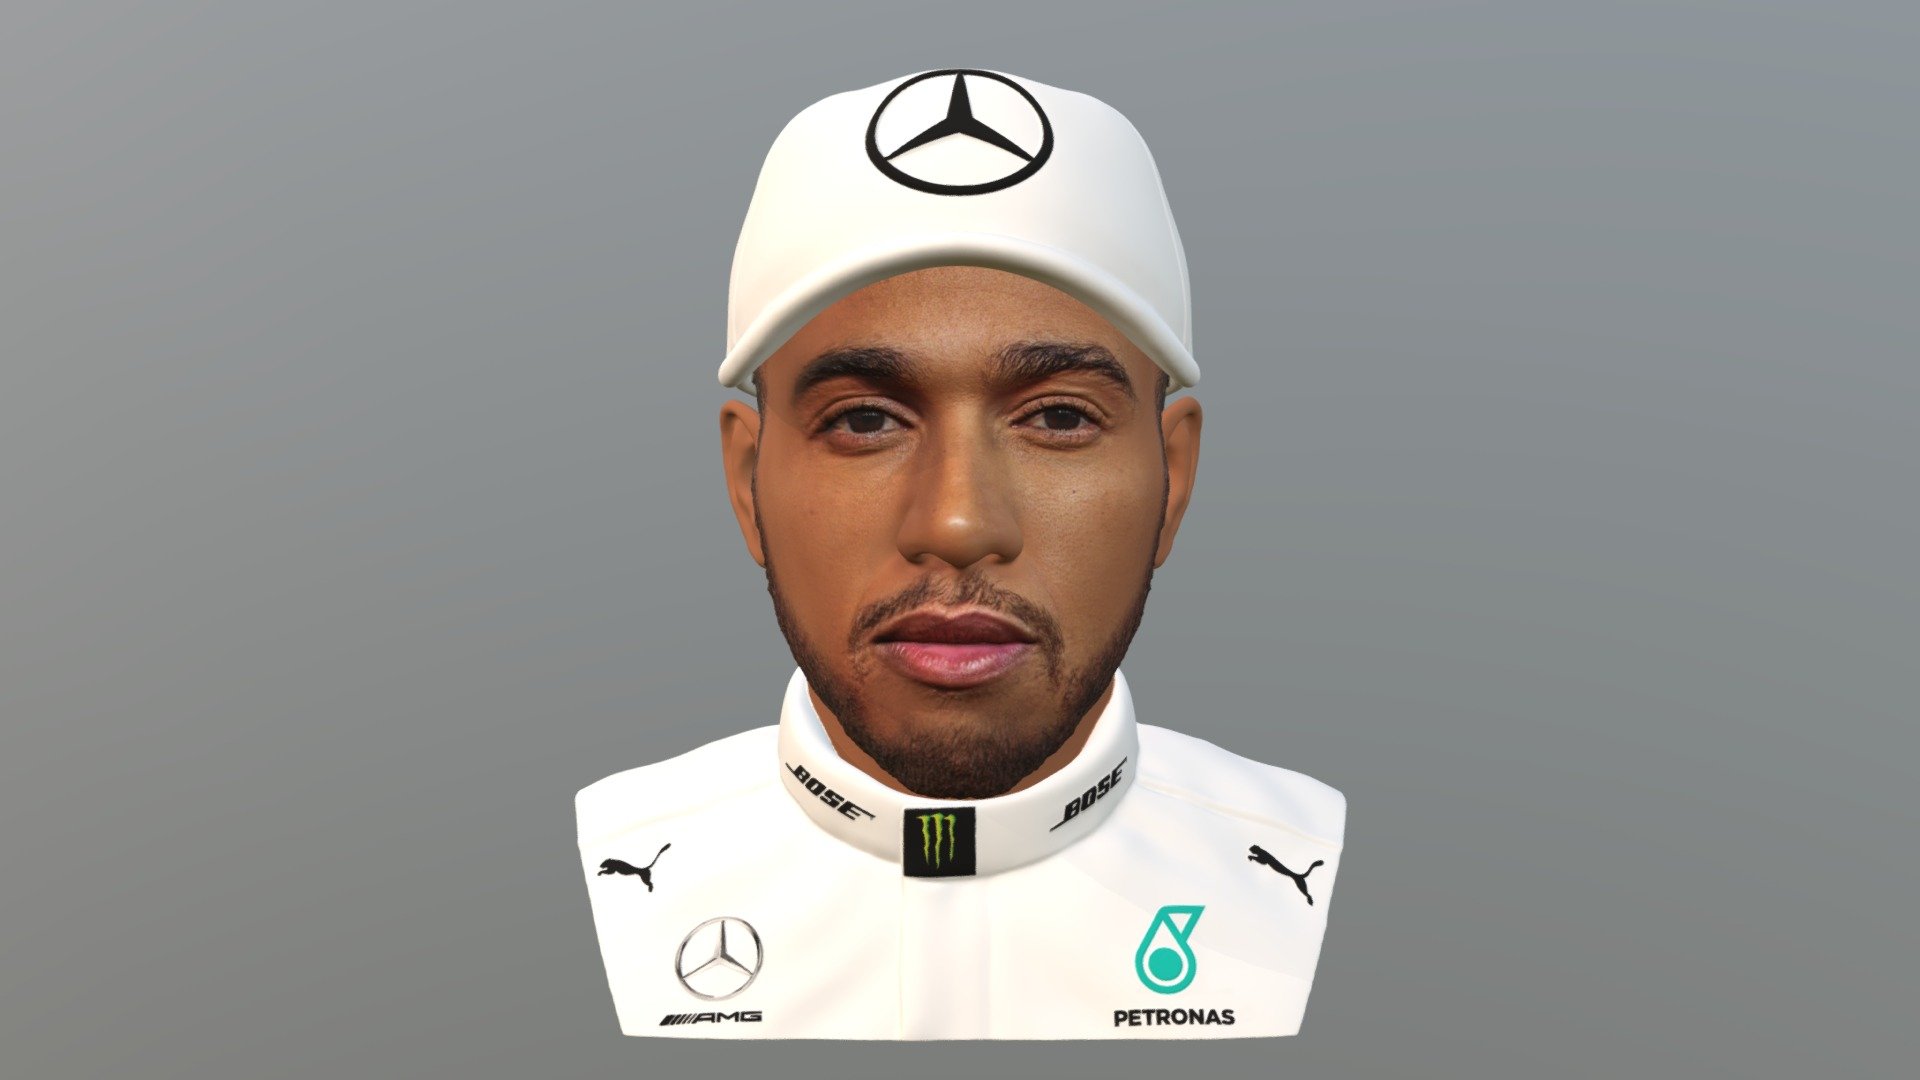 Lewis Hamilton bust for full color 3D printing